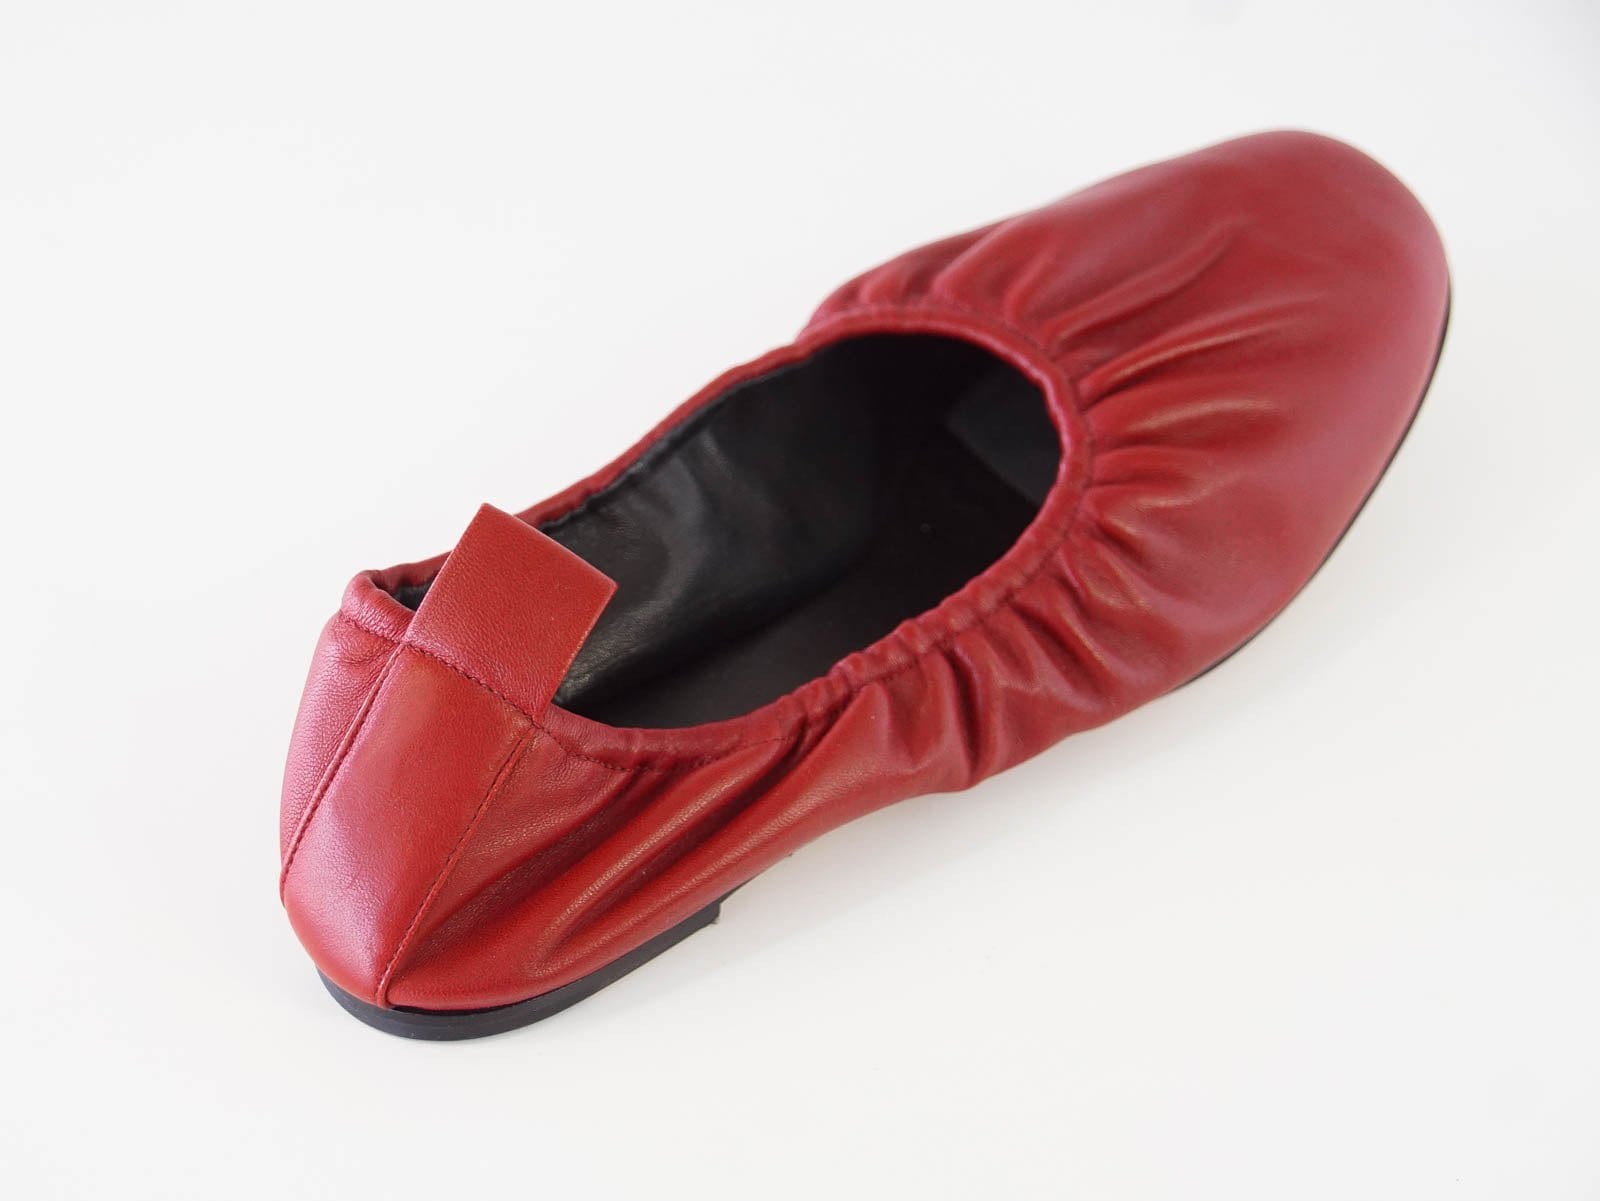 Celine Shoe Buttery Red Leather Ballet Flat Chic Styling 39 / 9 - mightychic